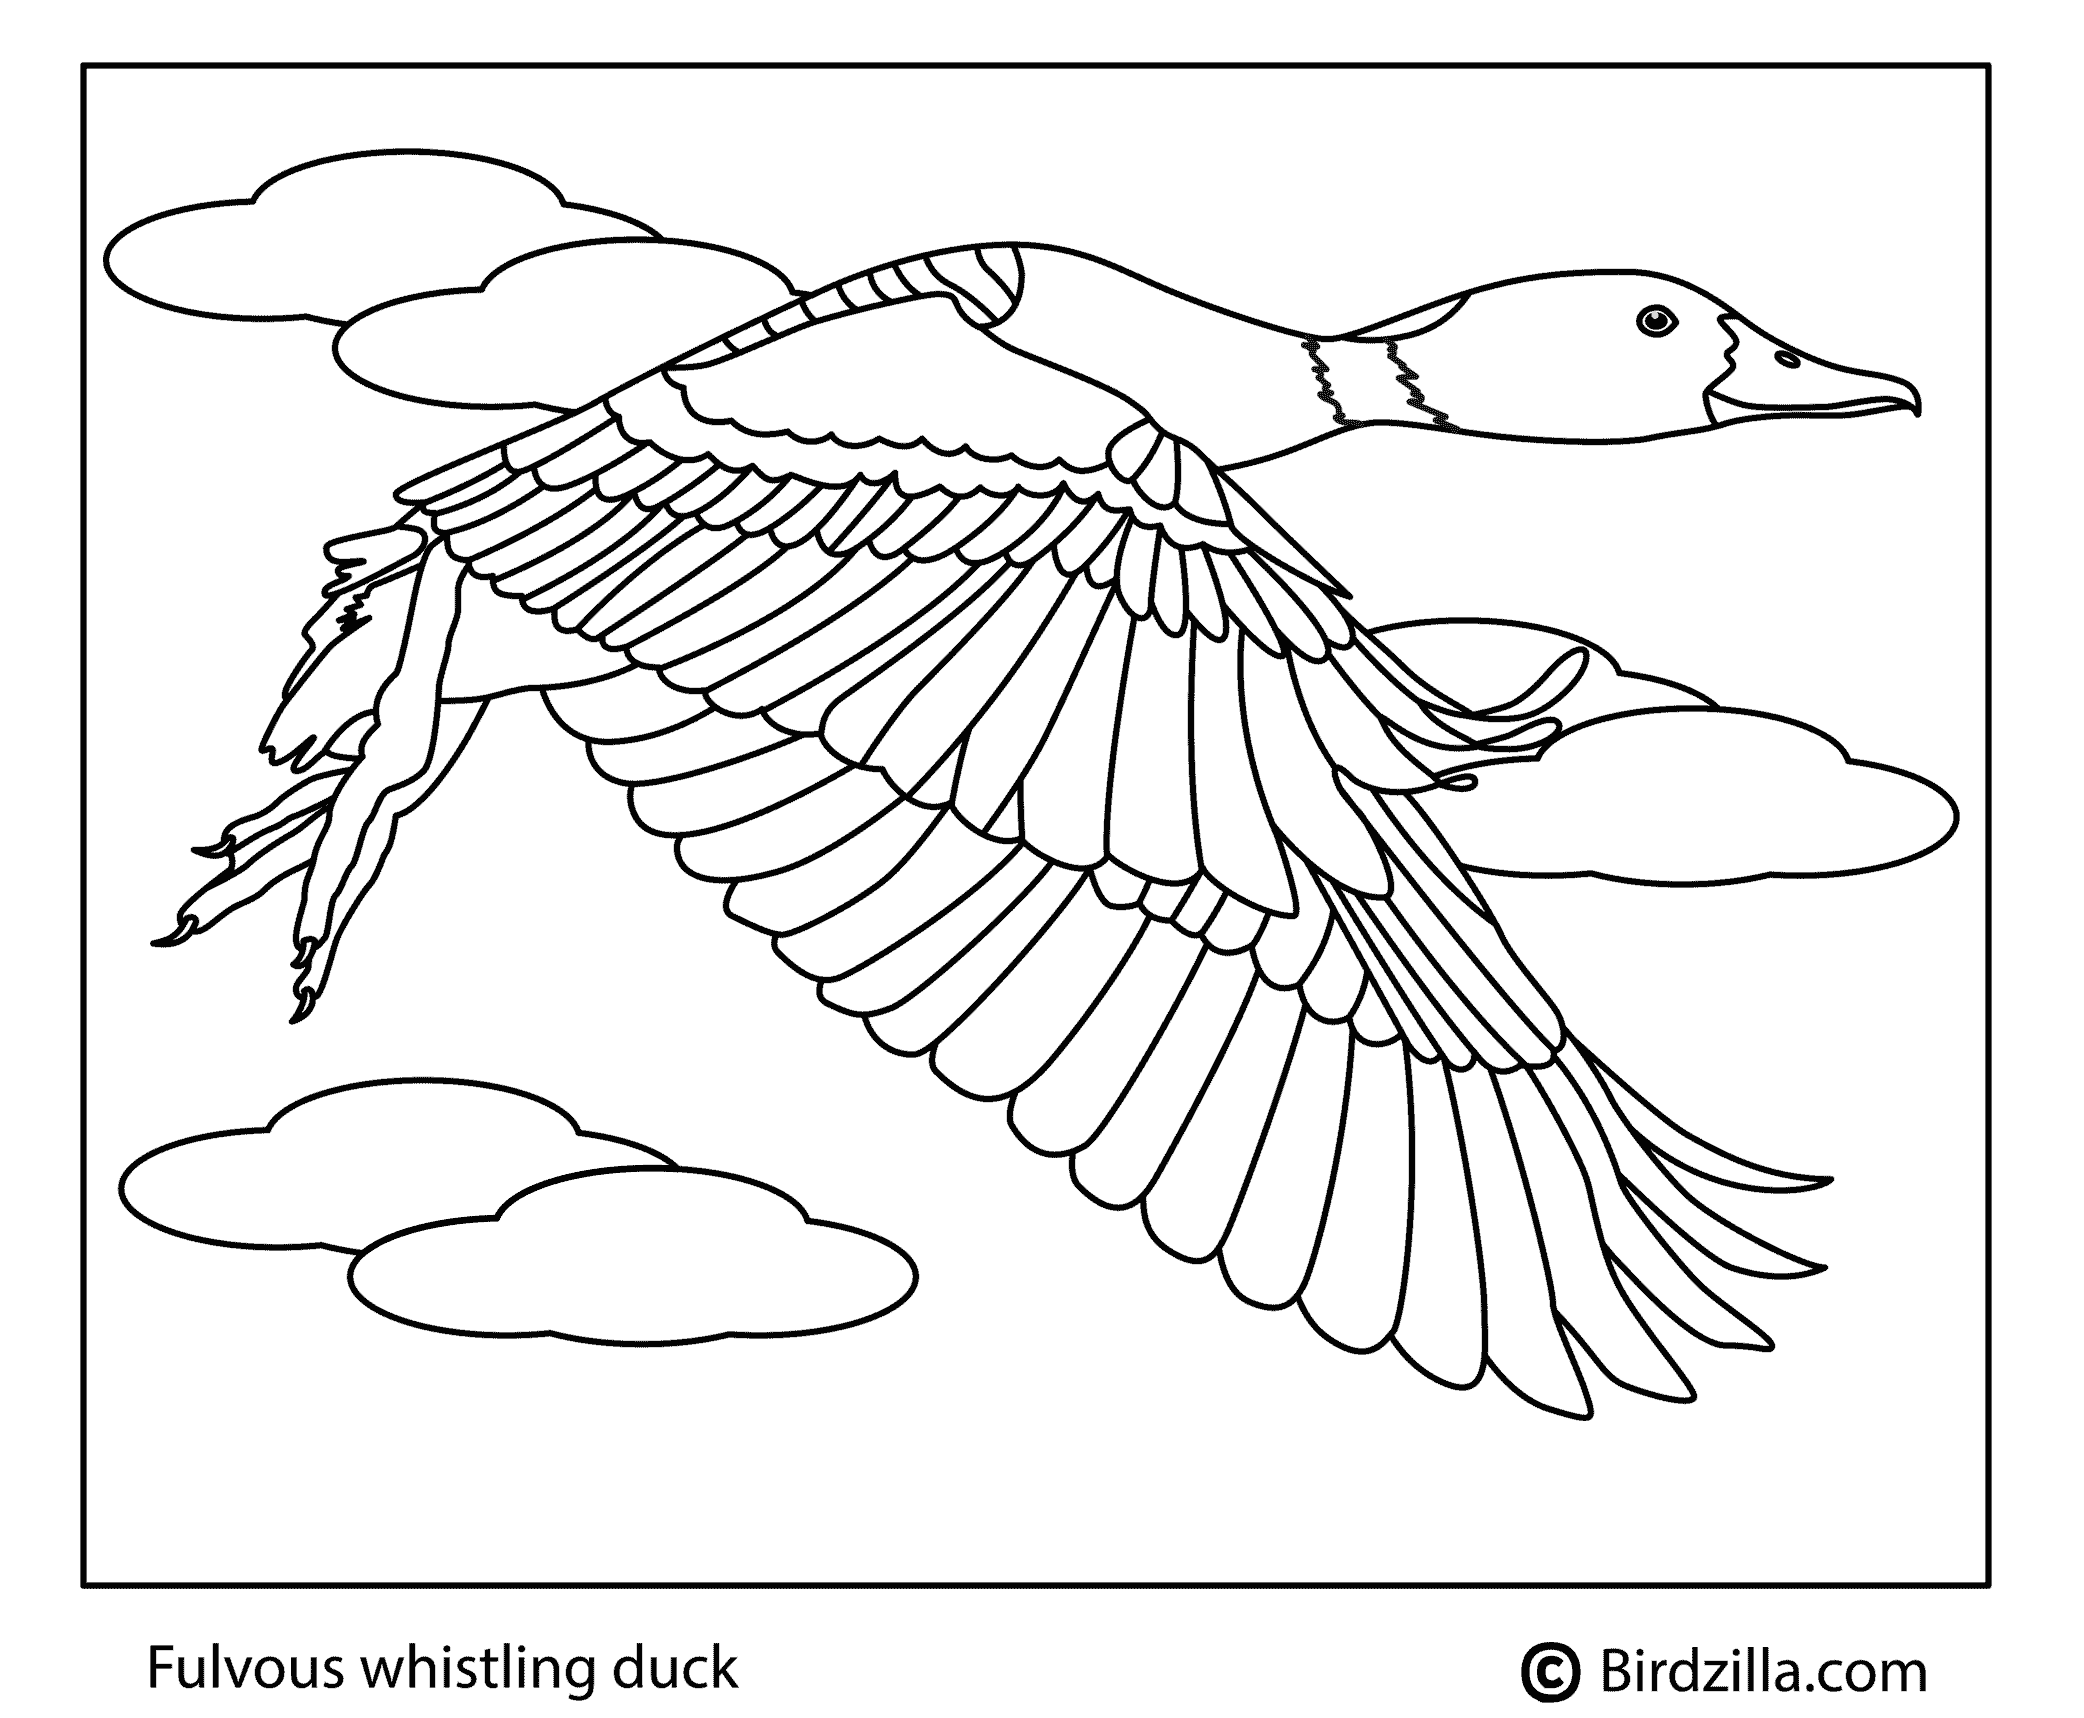 Fulvous-Whistling duck coloring page